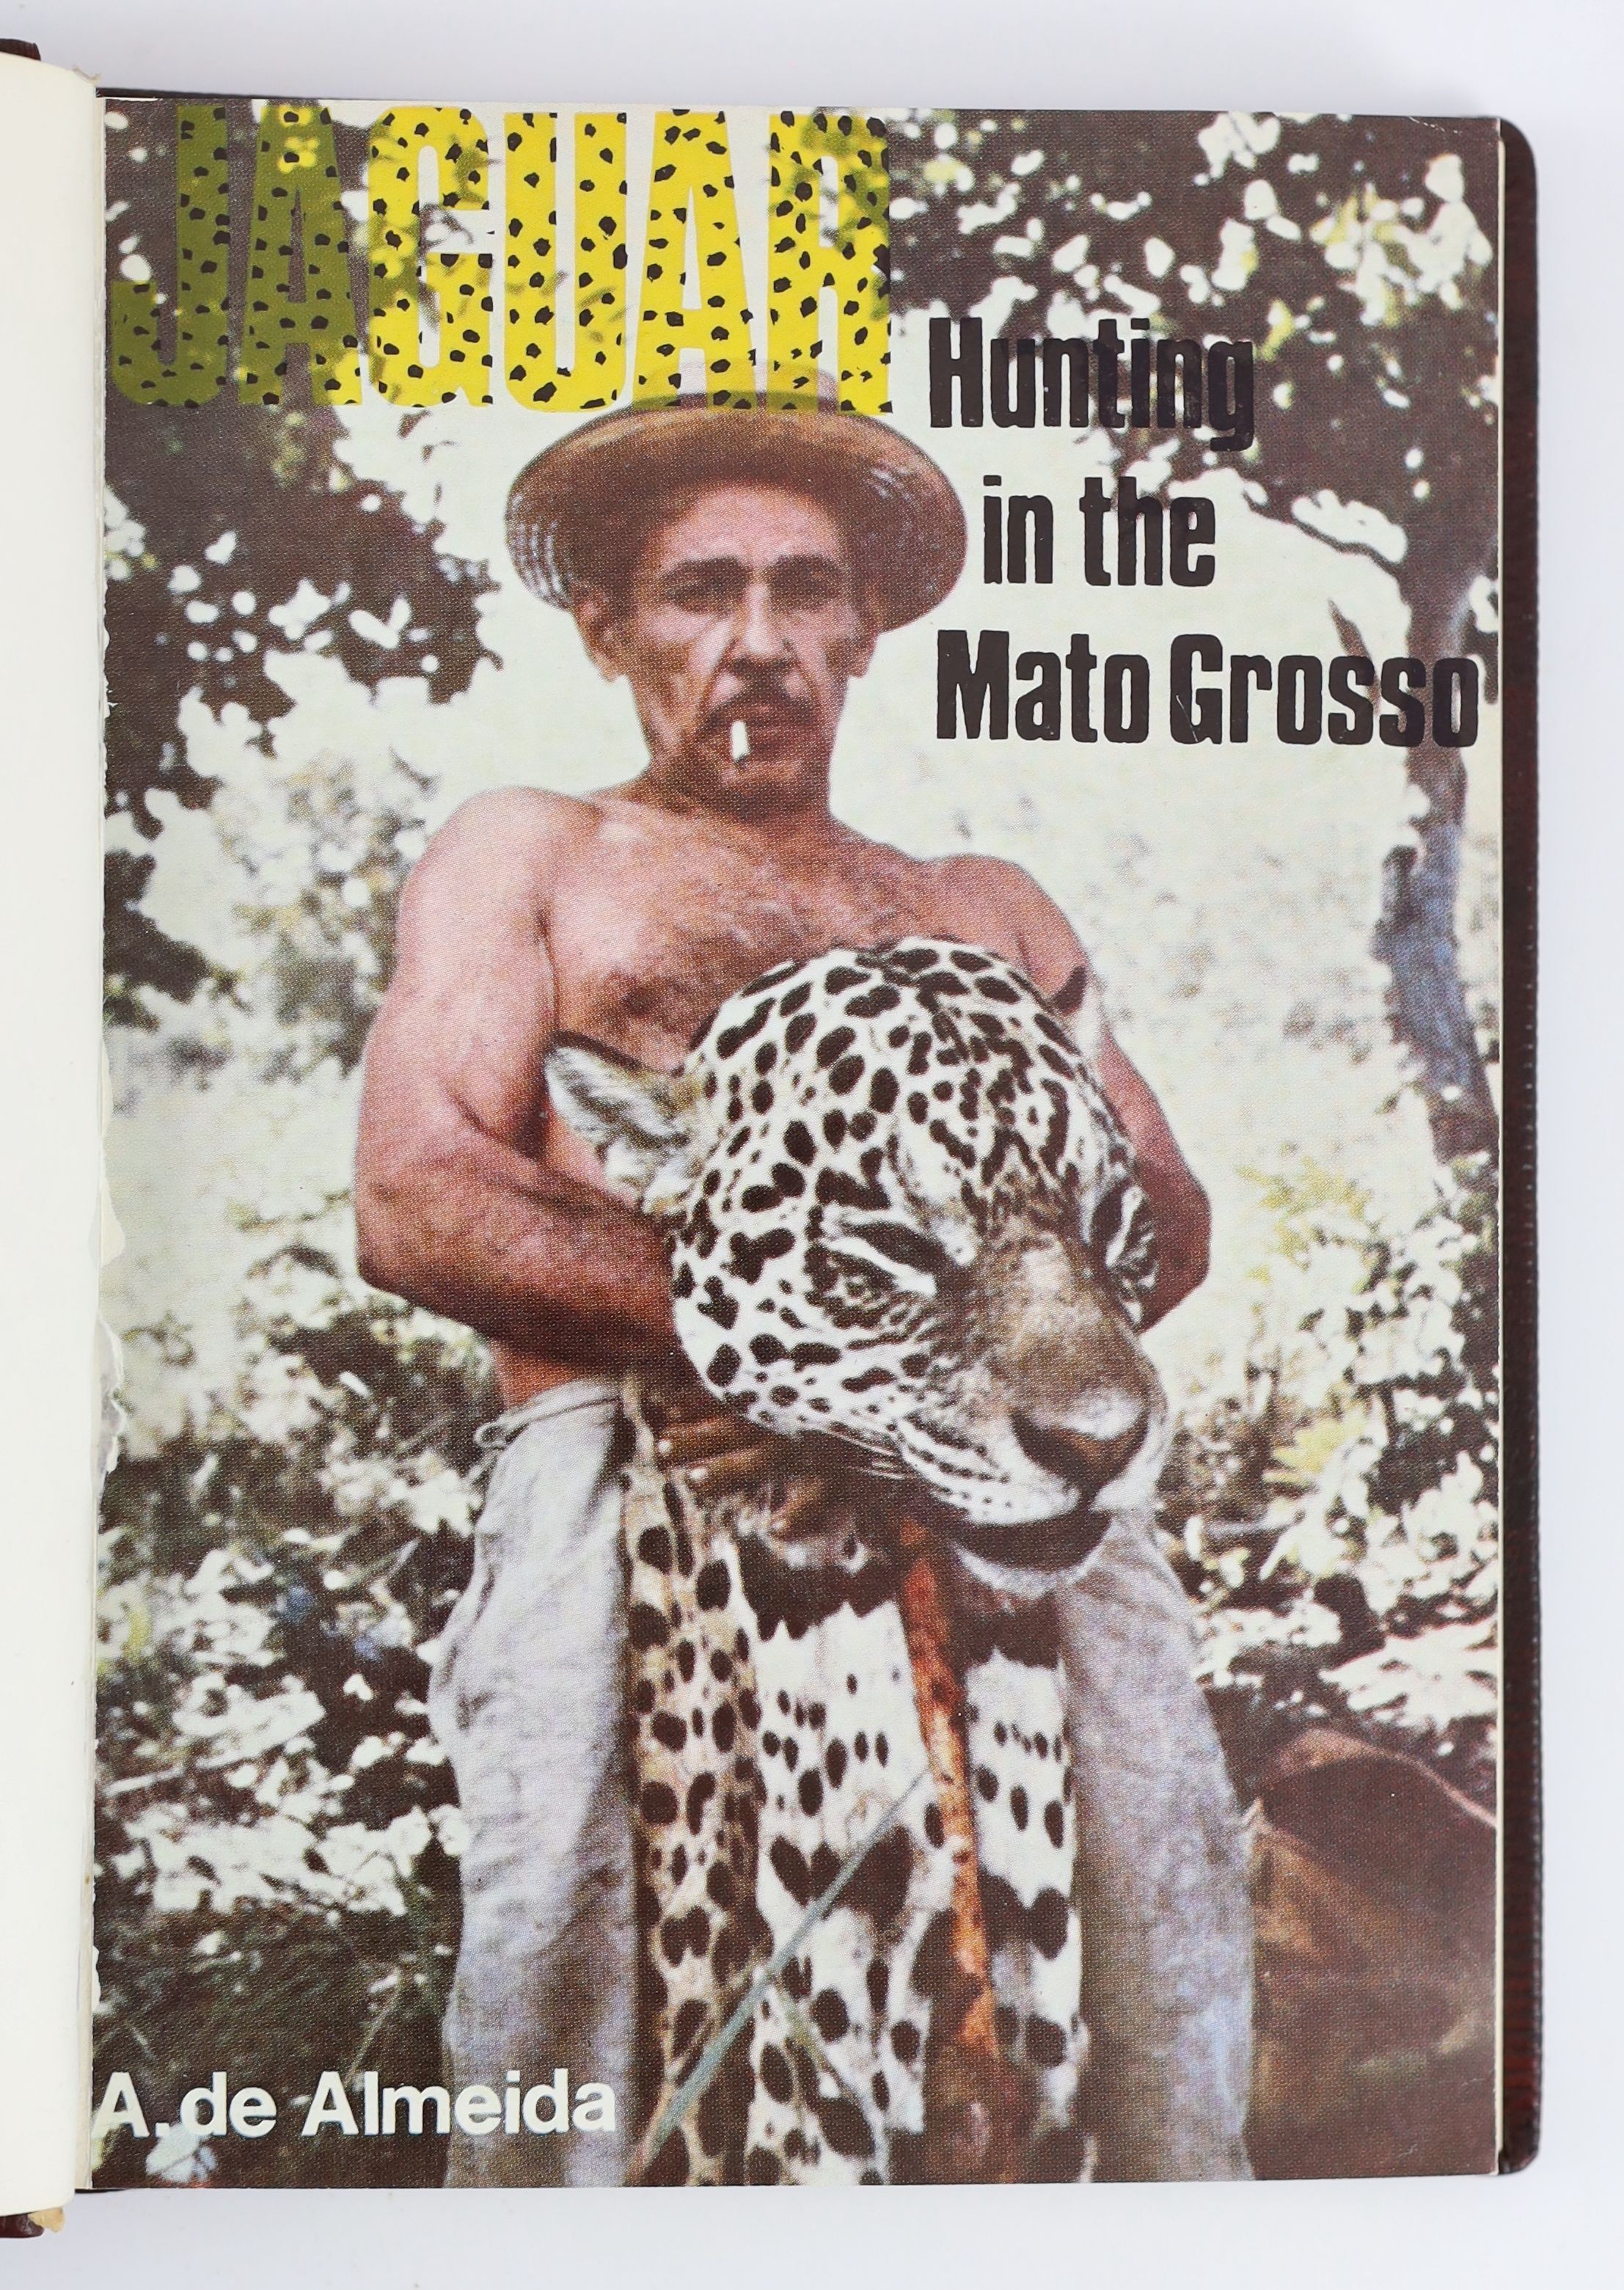 Almeida, Antonio A. Jaguar Hunting in the Mato Grosso. Stanwill Press, 1976. Full dark brown leather binding, gilt, with the original stiff paper wrapper bound in. * With a presentation inscription on the second free end